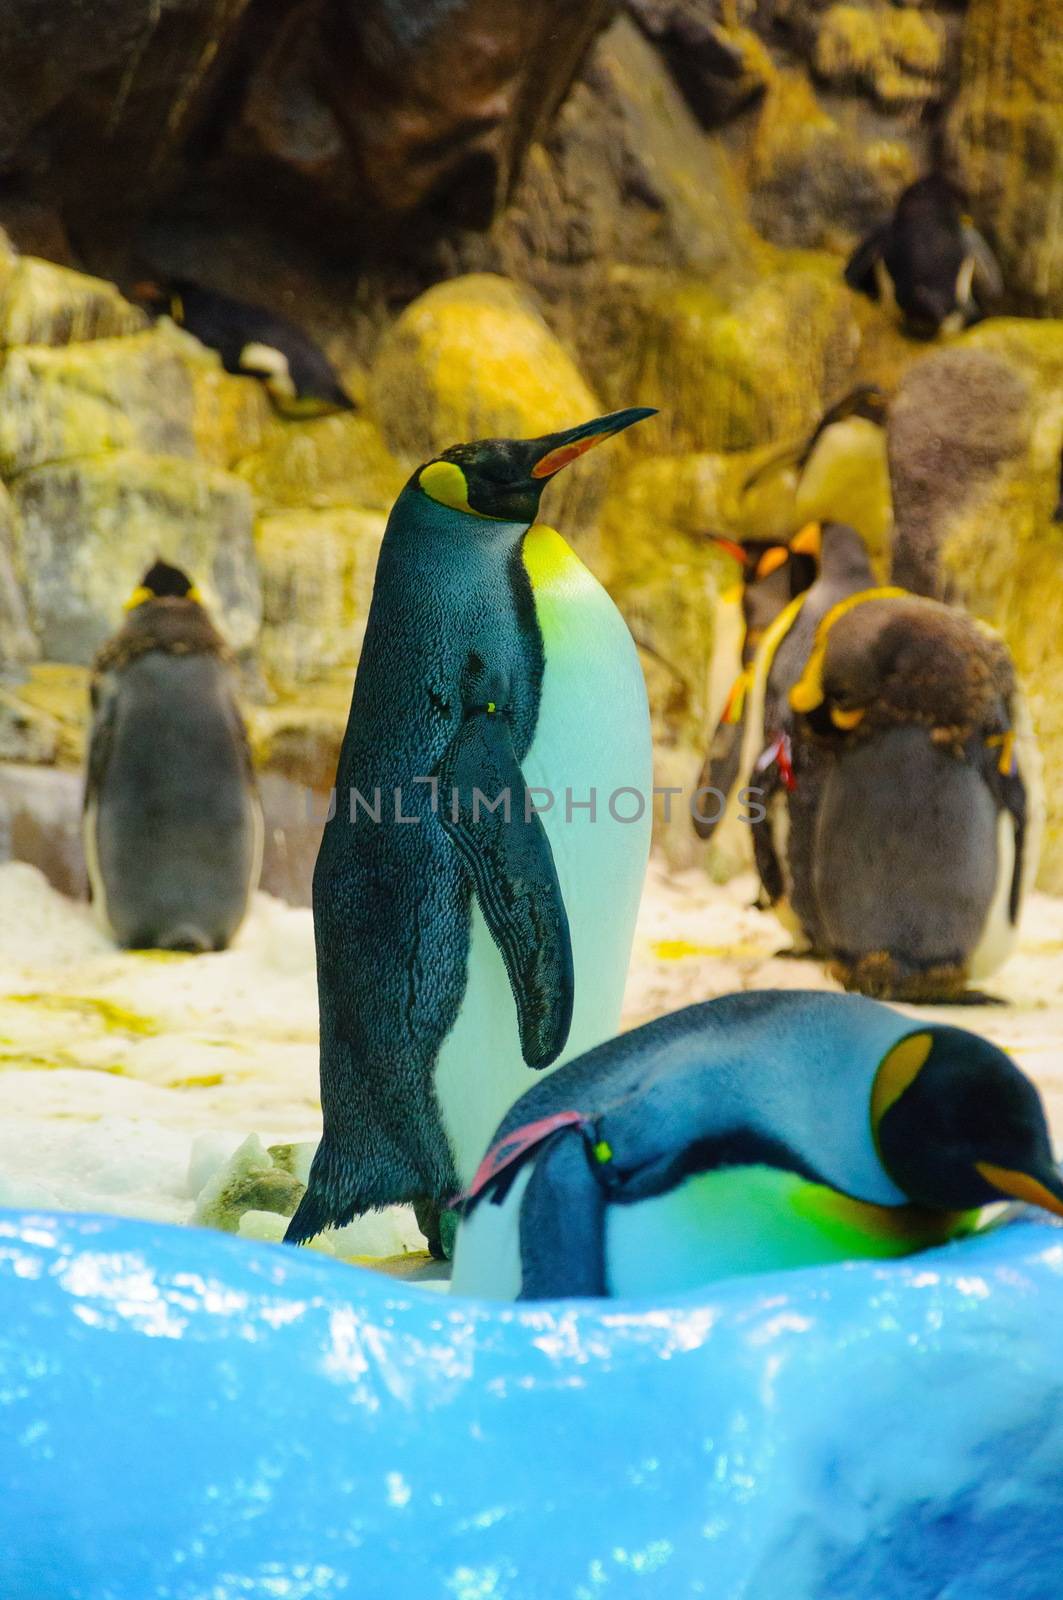 Big King penguins in Loro Parque, Tenerife, Canary Islands. by Eagle2308